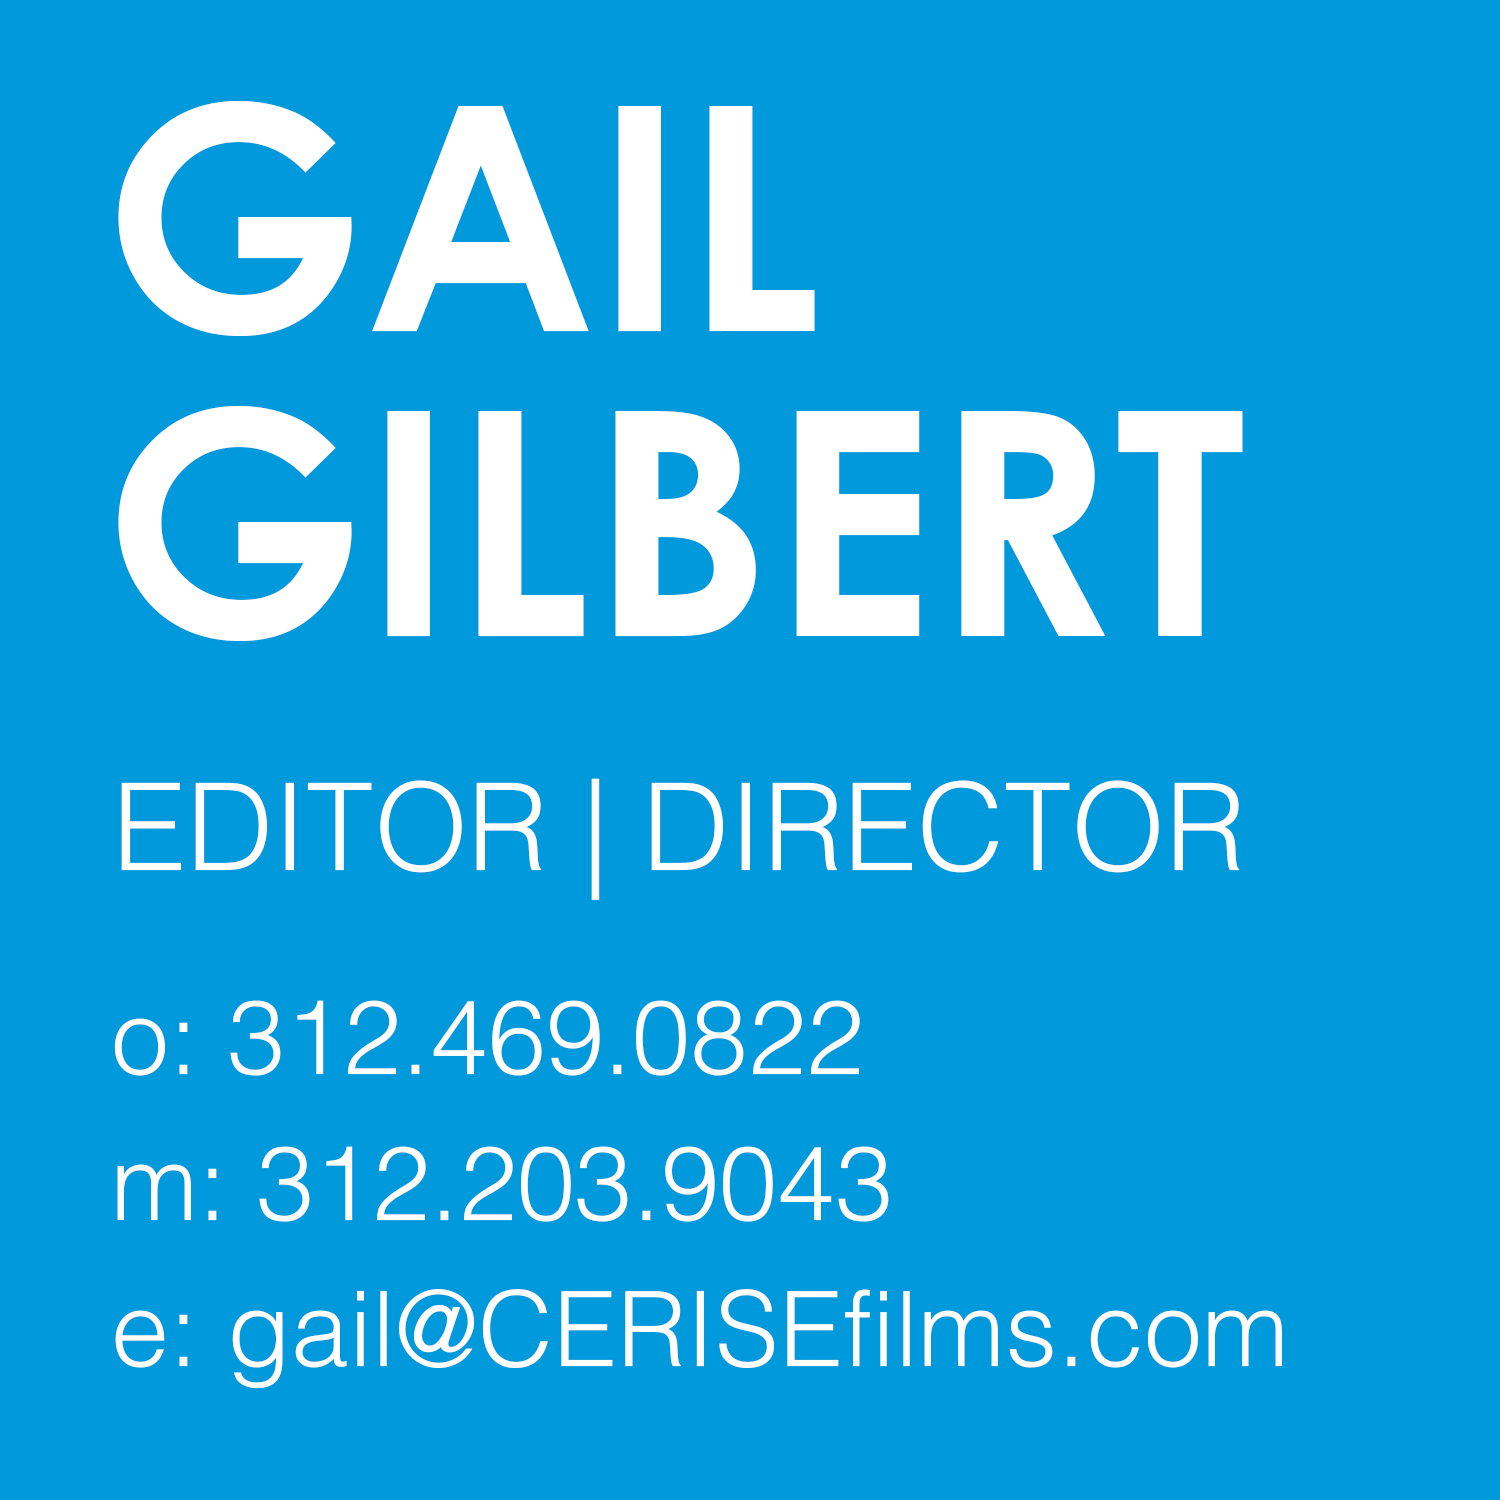 gail-website-contact-icons.png